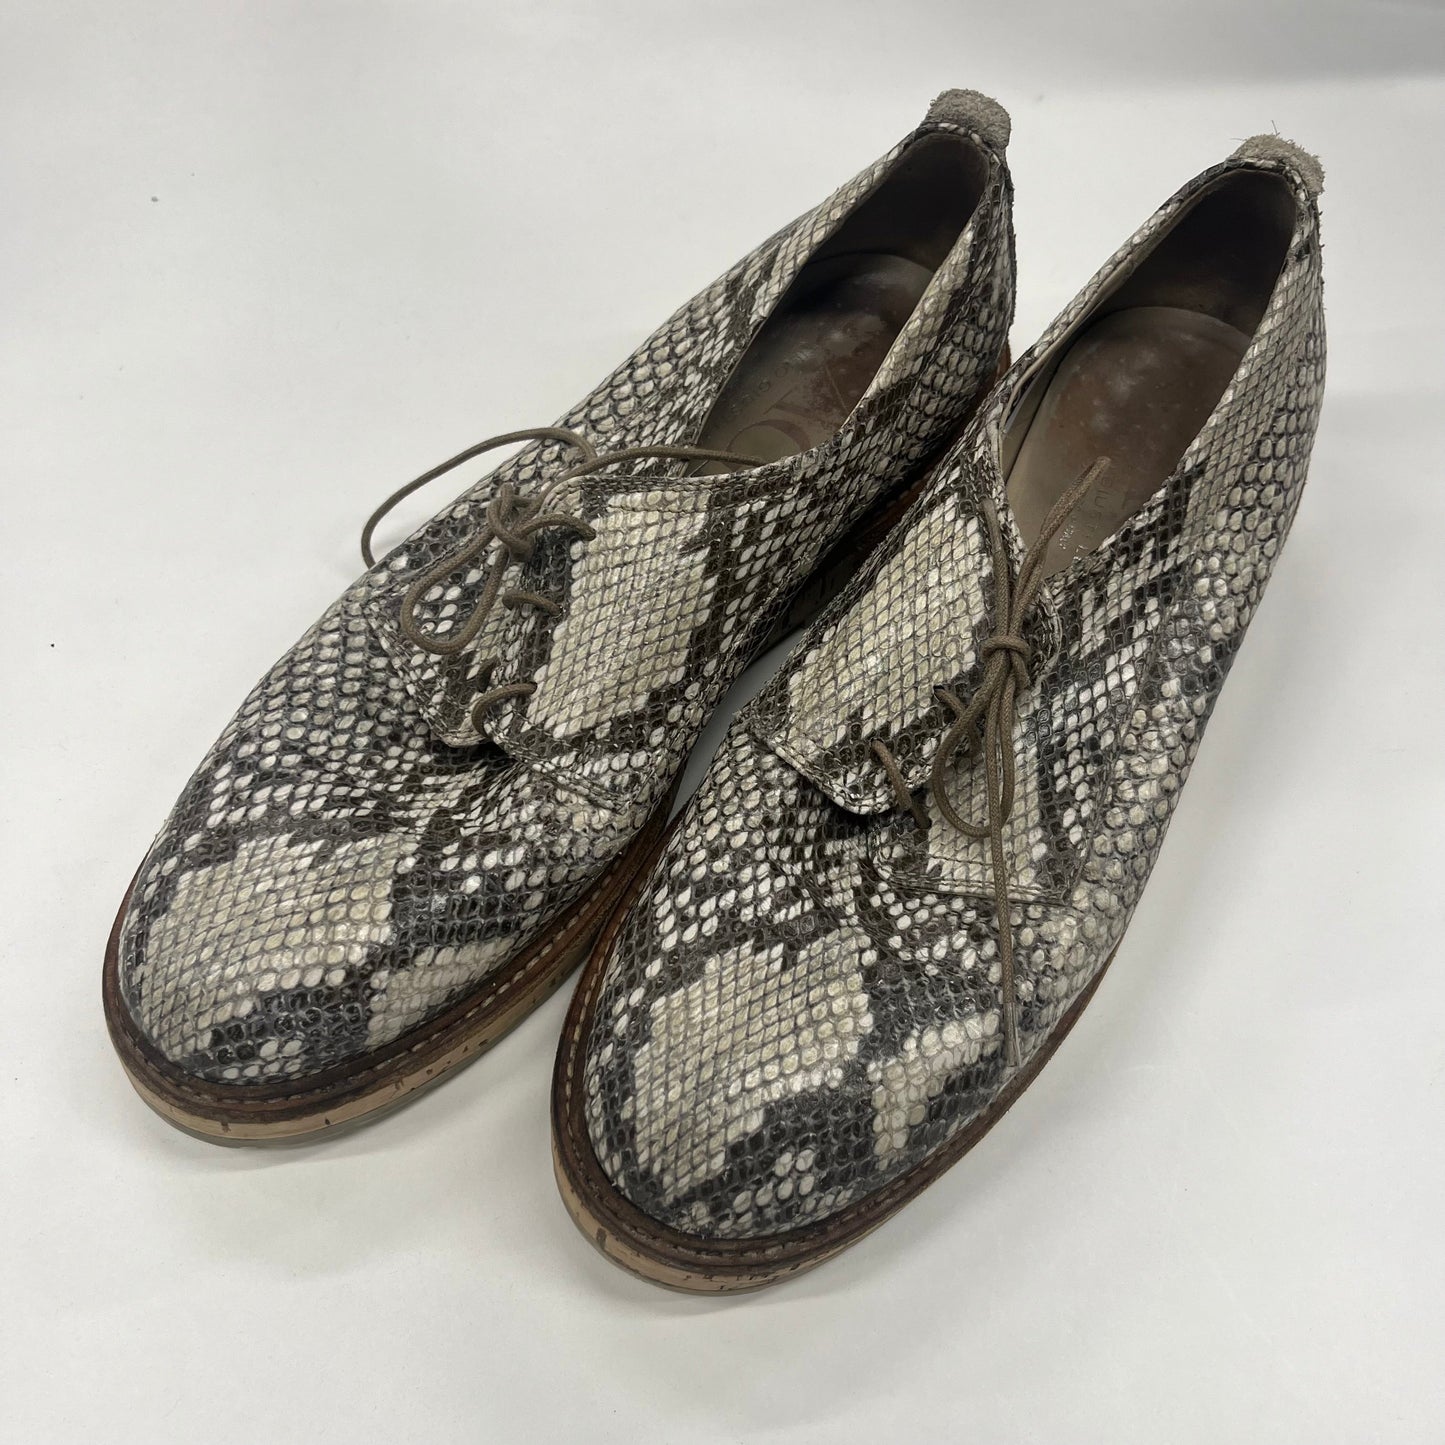 Animal Print Shoes Flats Loafer Oxford Agl, Size 9.5